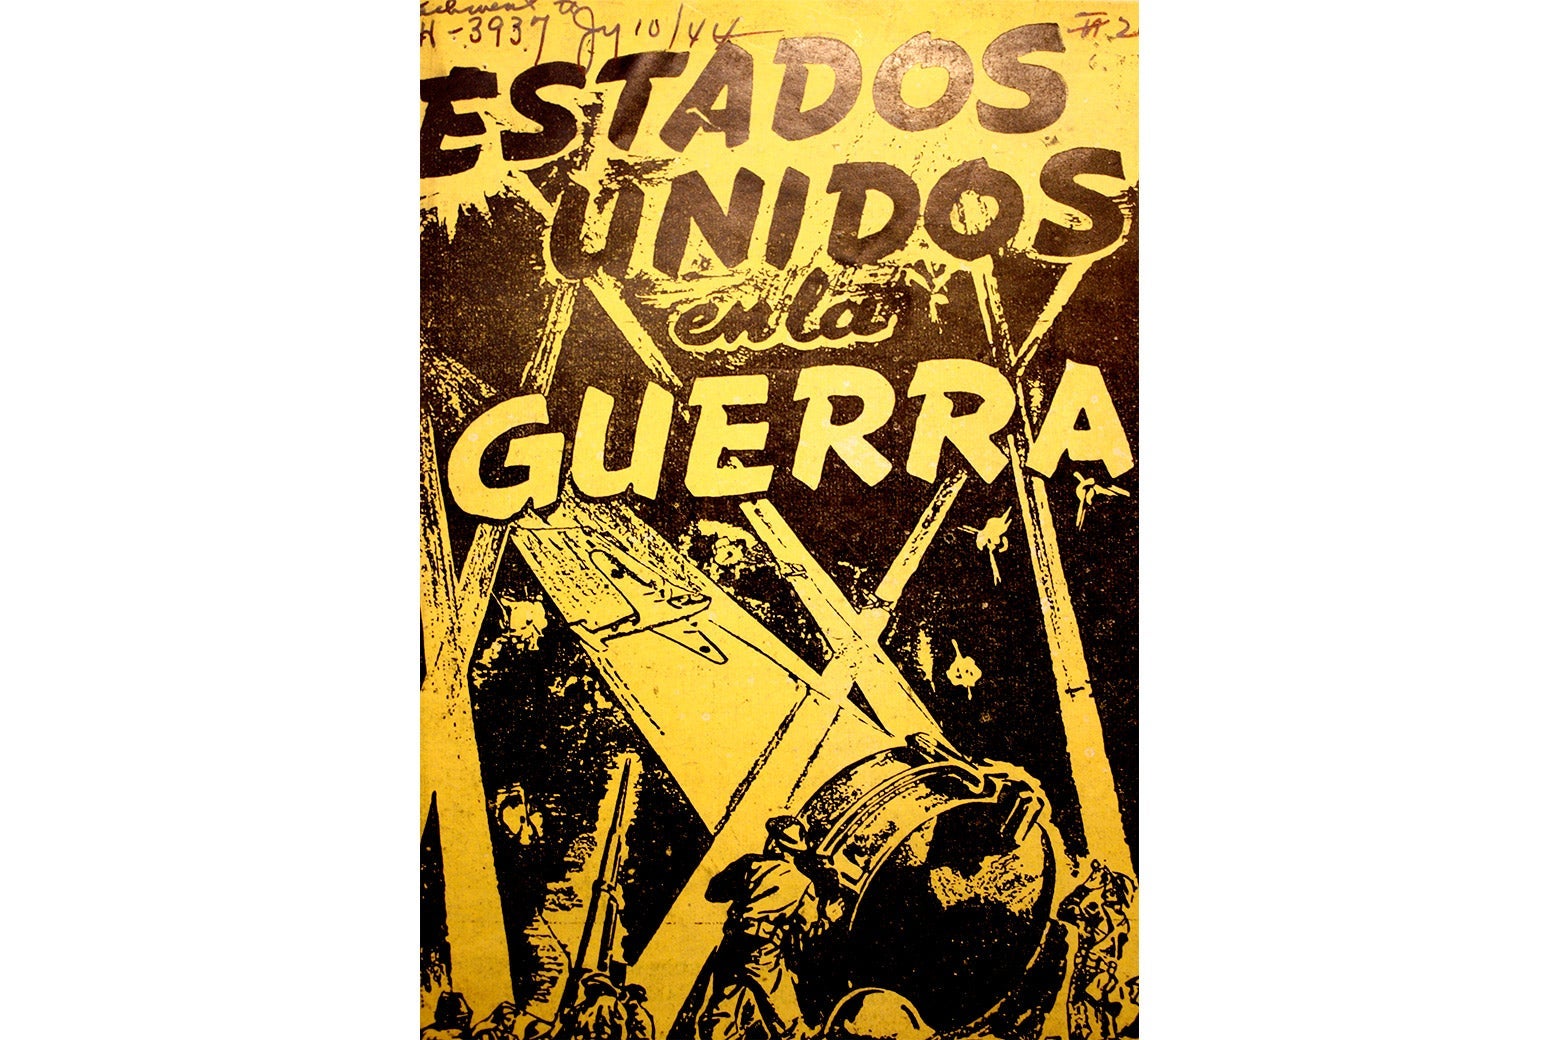 The yellow cover of a Spanish language comic.